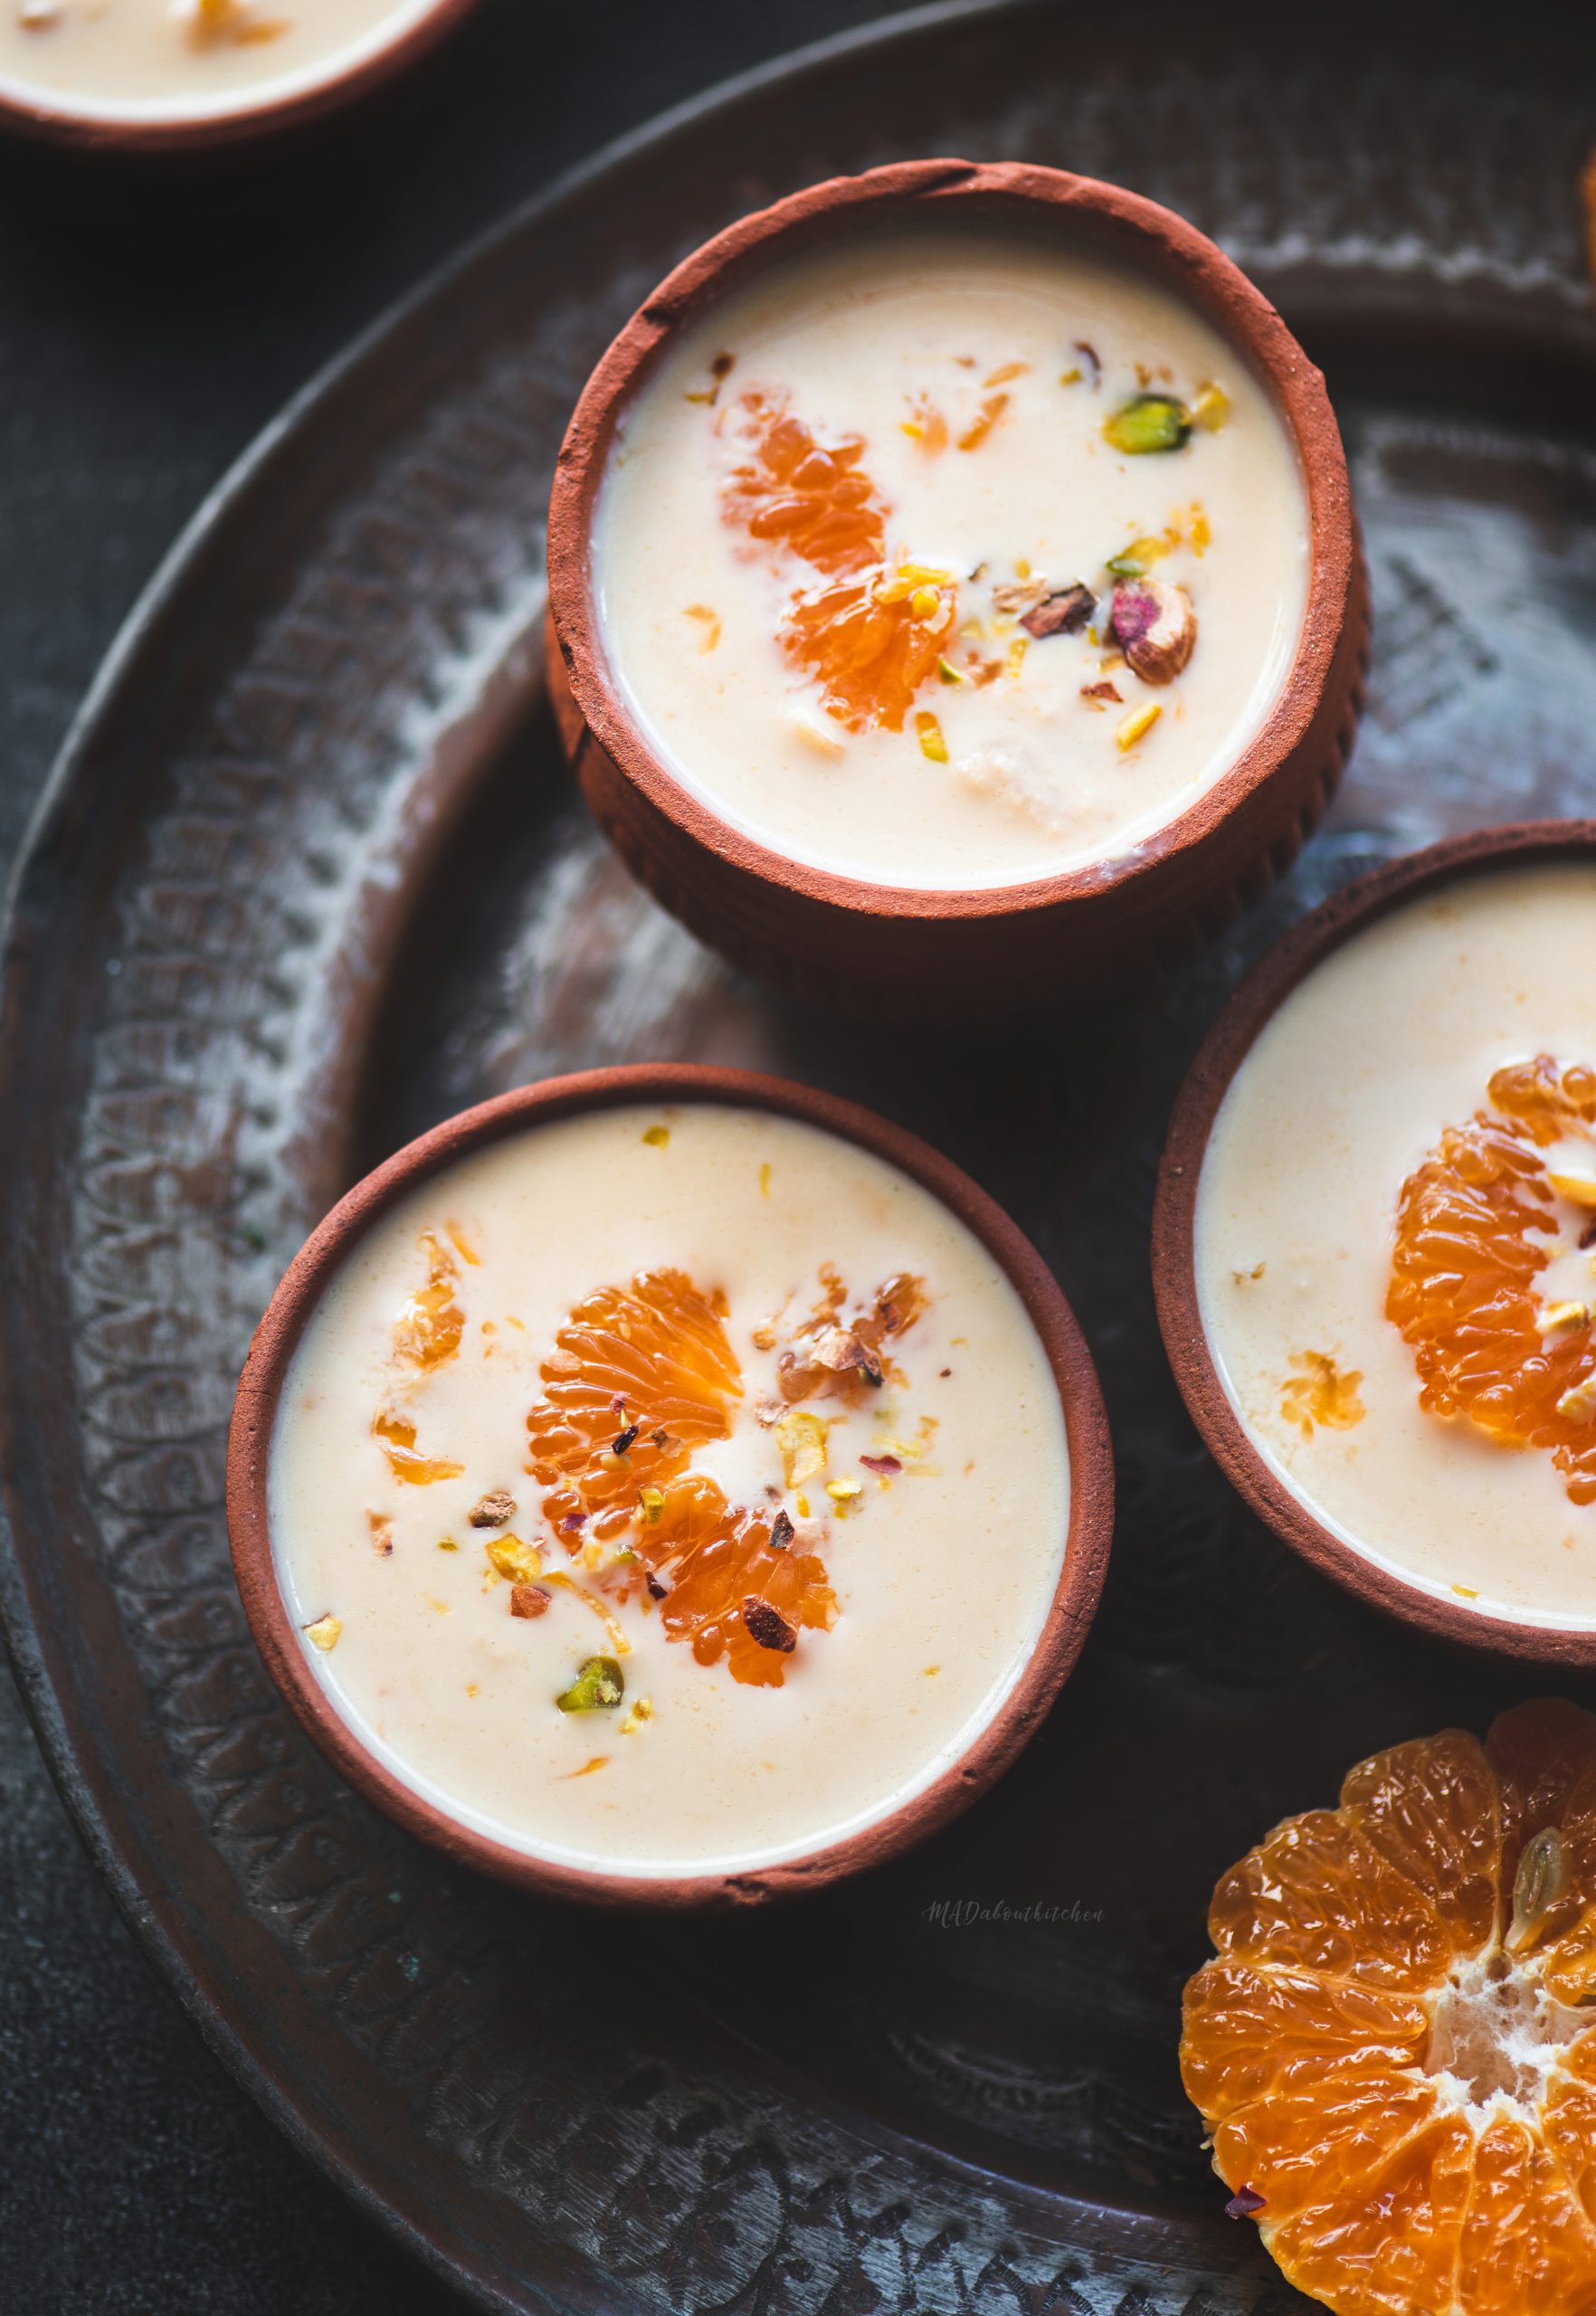 Kheer Komola is a Bengali Orange pudding, made by reducing milk and adding fresh Orange segments to it and is not only rich but also fresh.